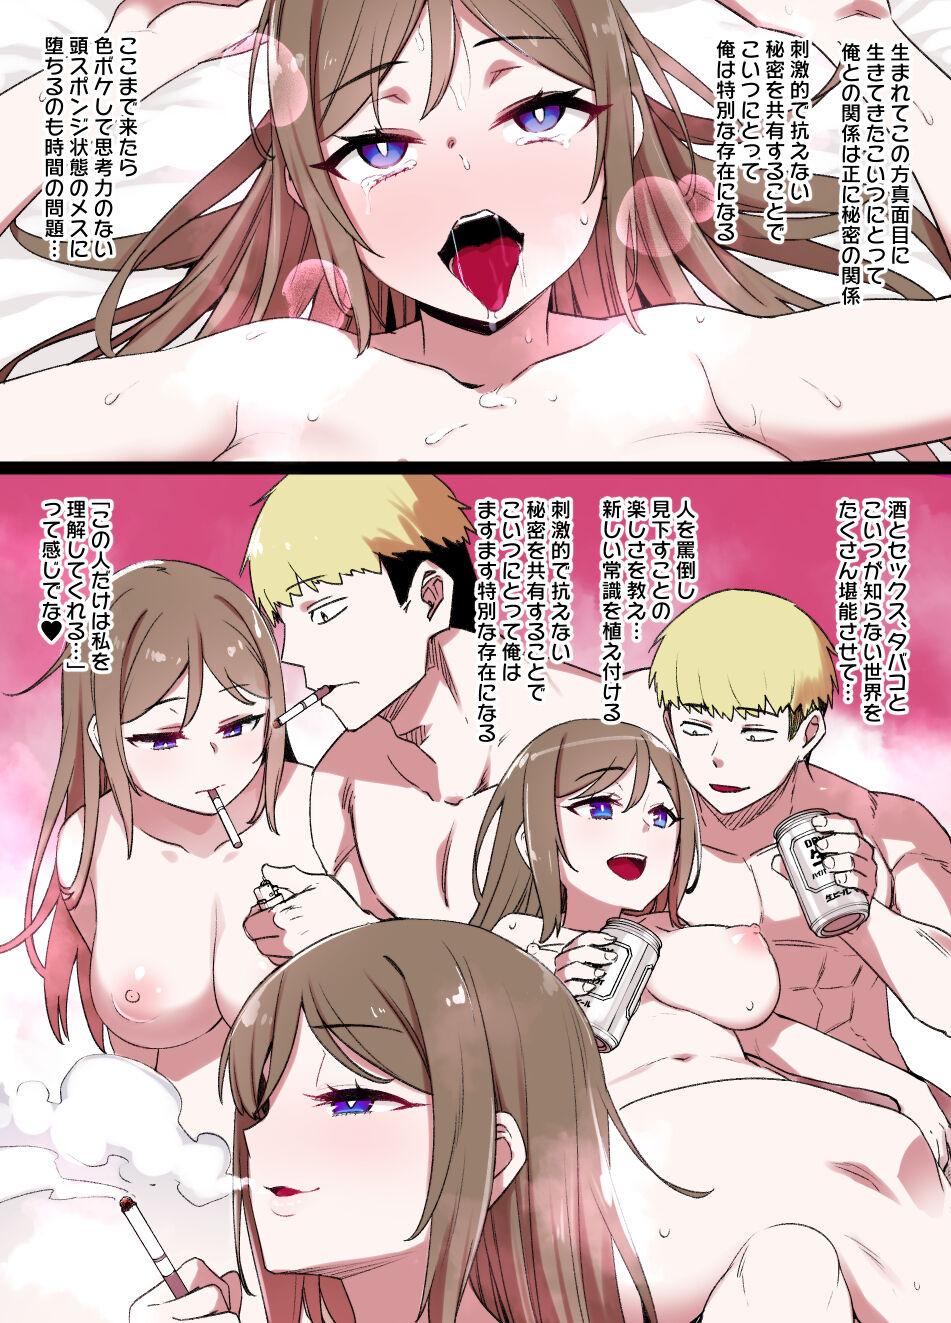 Bucetinha 100日後に寝取られる彼女～桐谷シンSIDE～漫画12P - Original All - Page 8